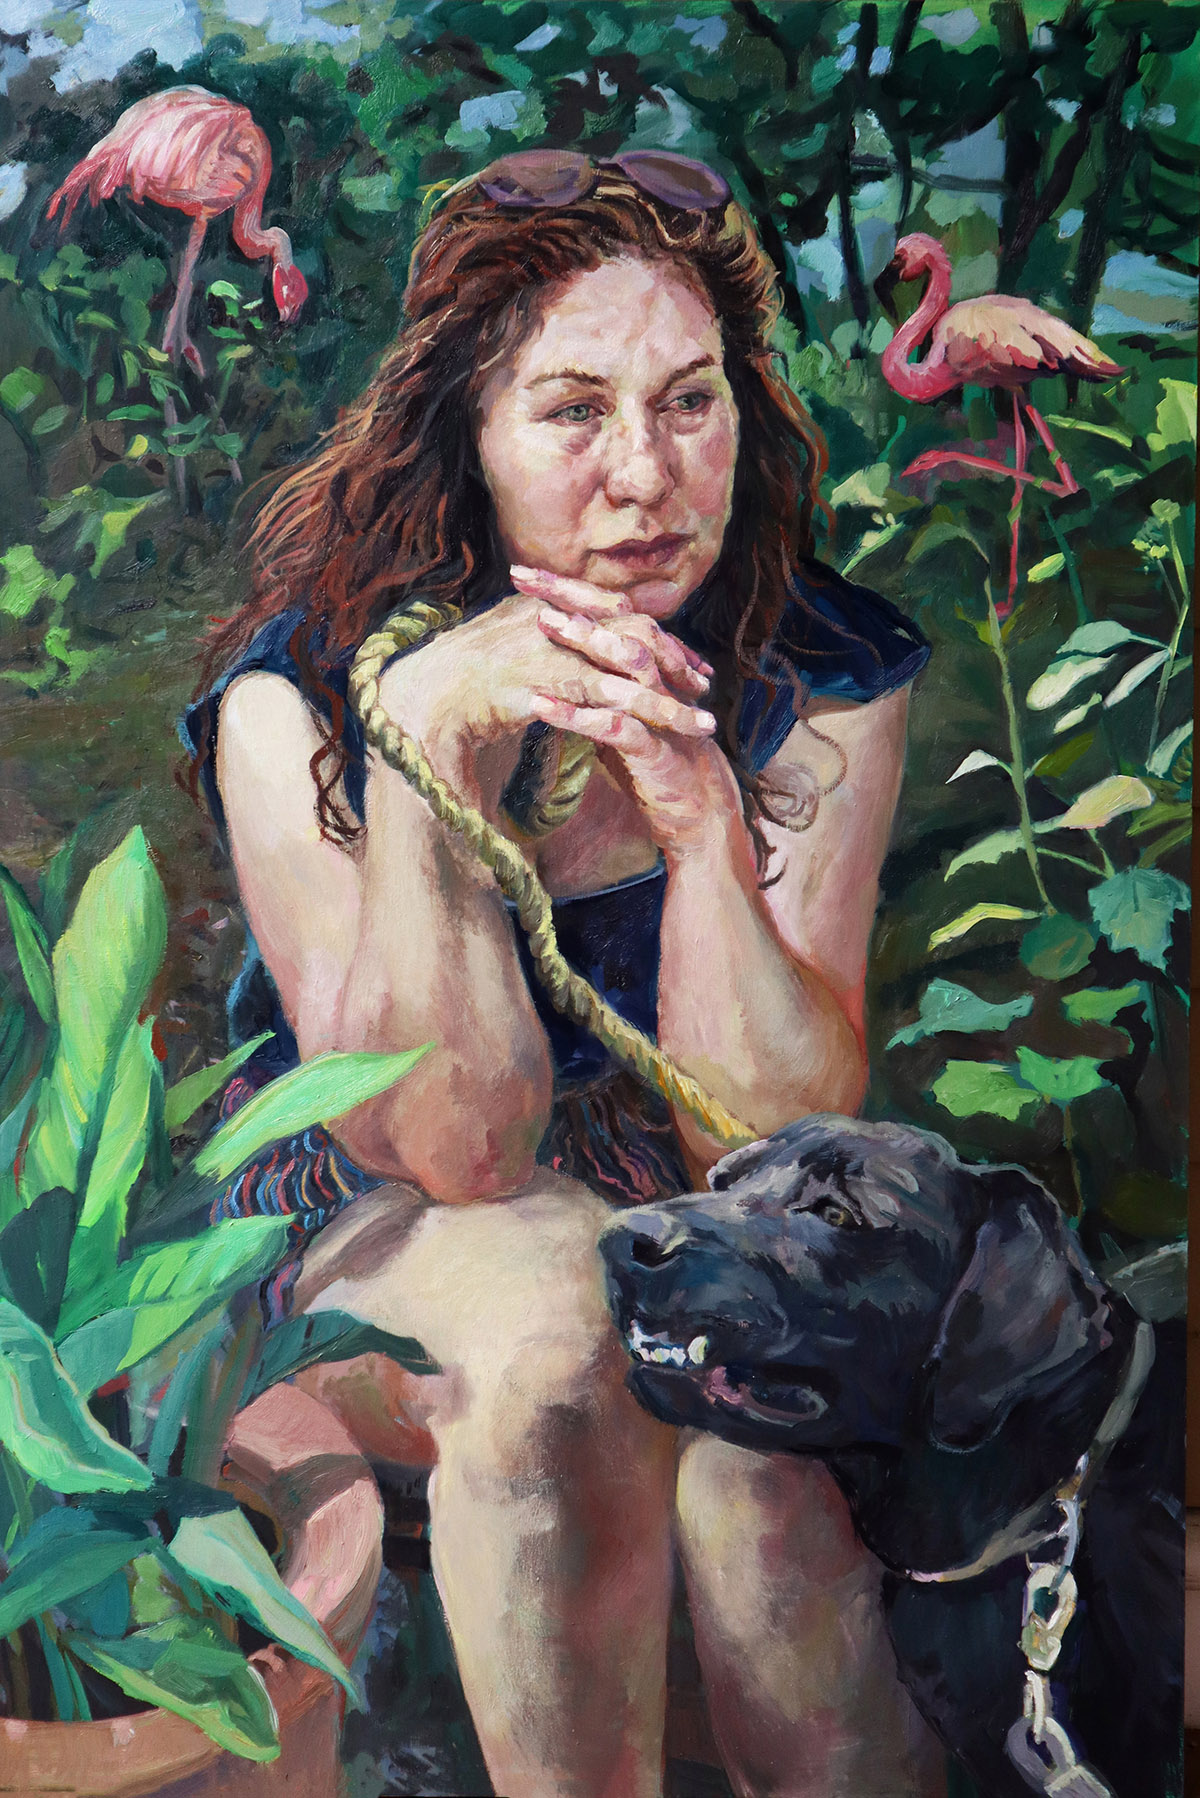 oil painting of a woman sitting, surrounded by bushes and flowers, and a black dog leaning against her